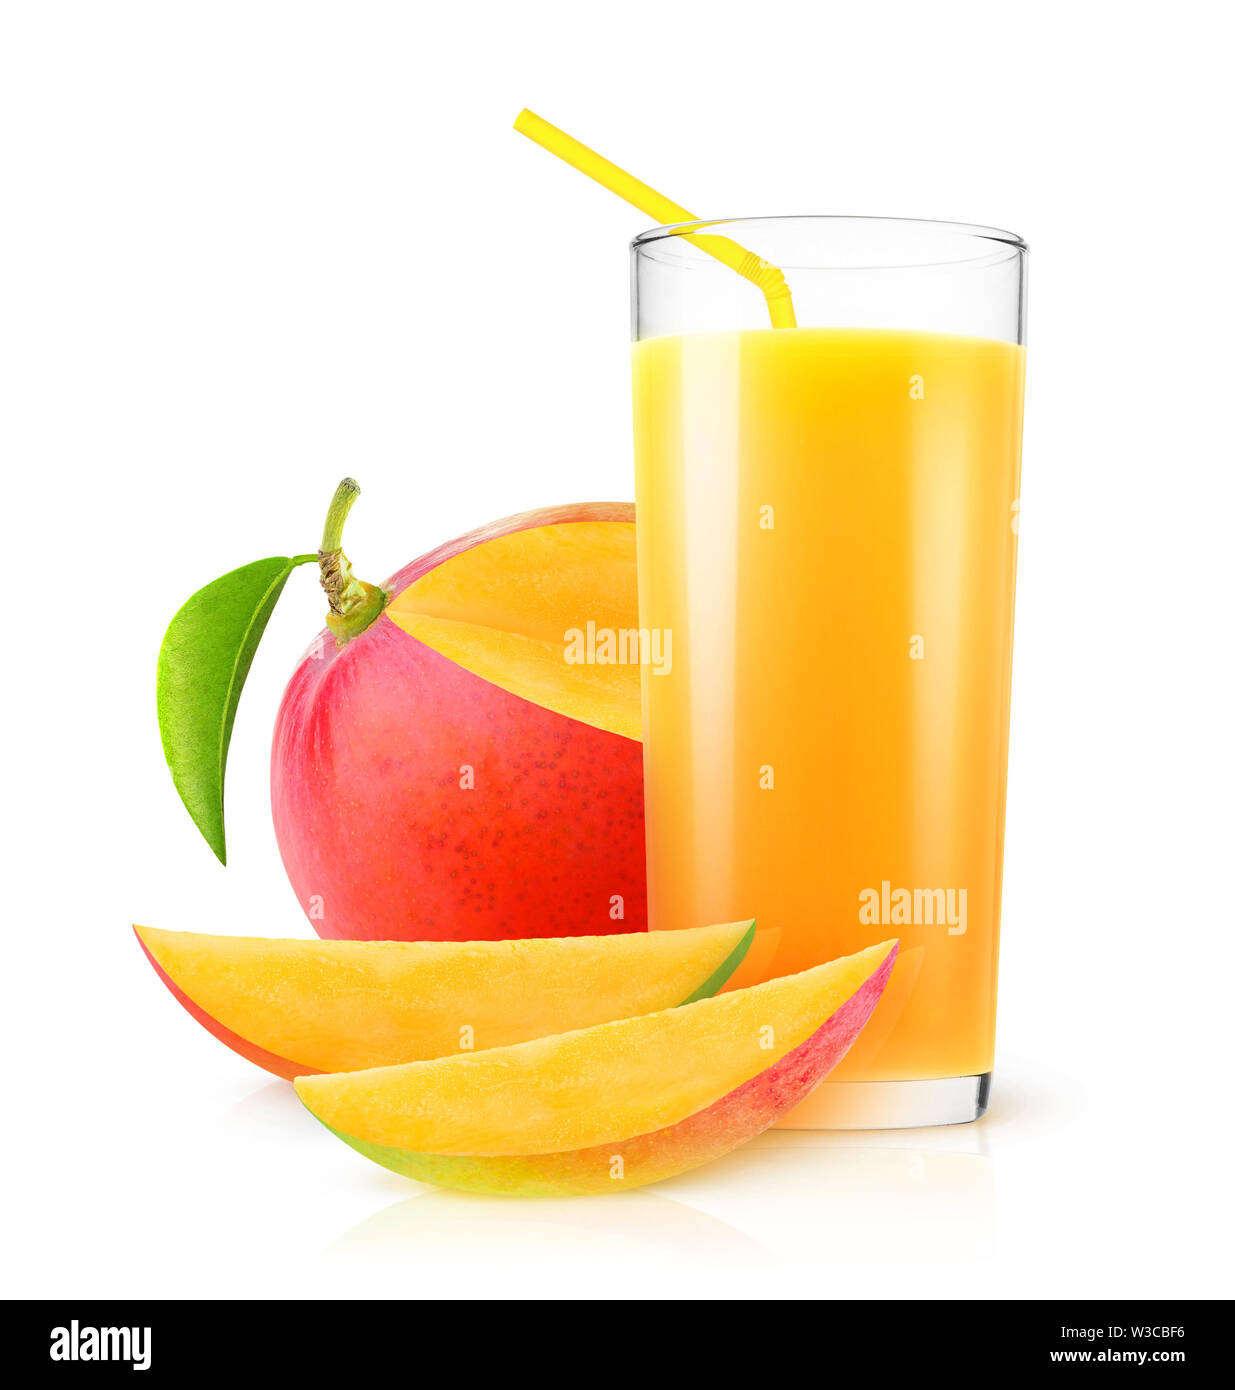 https://c8.alamy.com/comp/W3CBF6/isolated-mango-juice-fresh-mango-drink-in-a-glass-and-pieces-of-fruit-isolated-on-white-background-with-clipping-path-W3CBF6.jpg